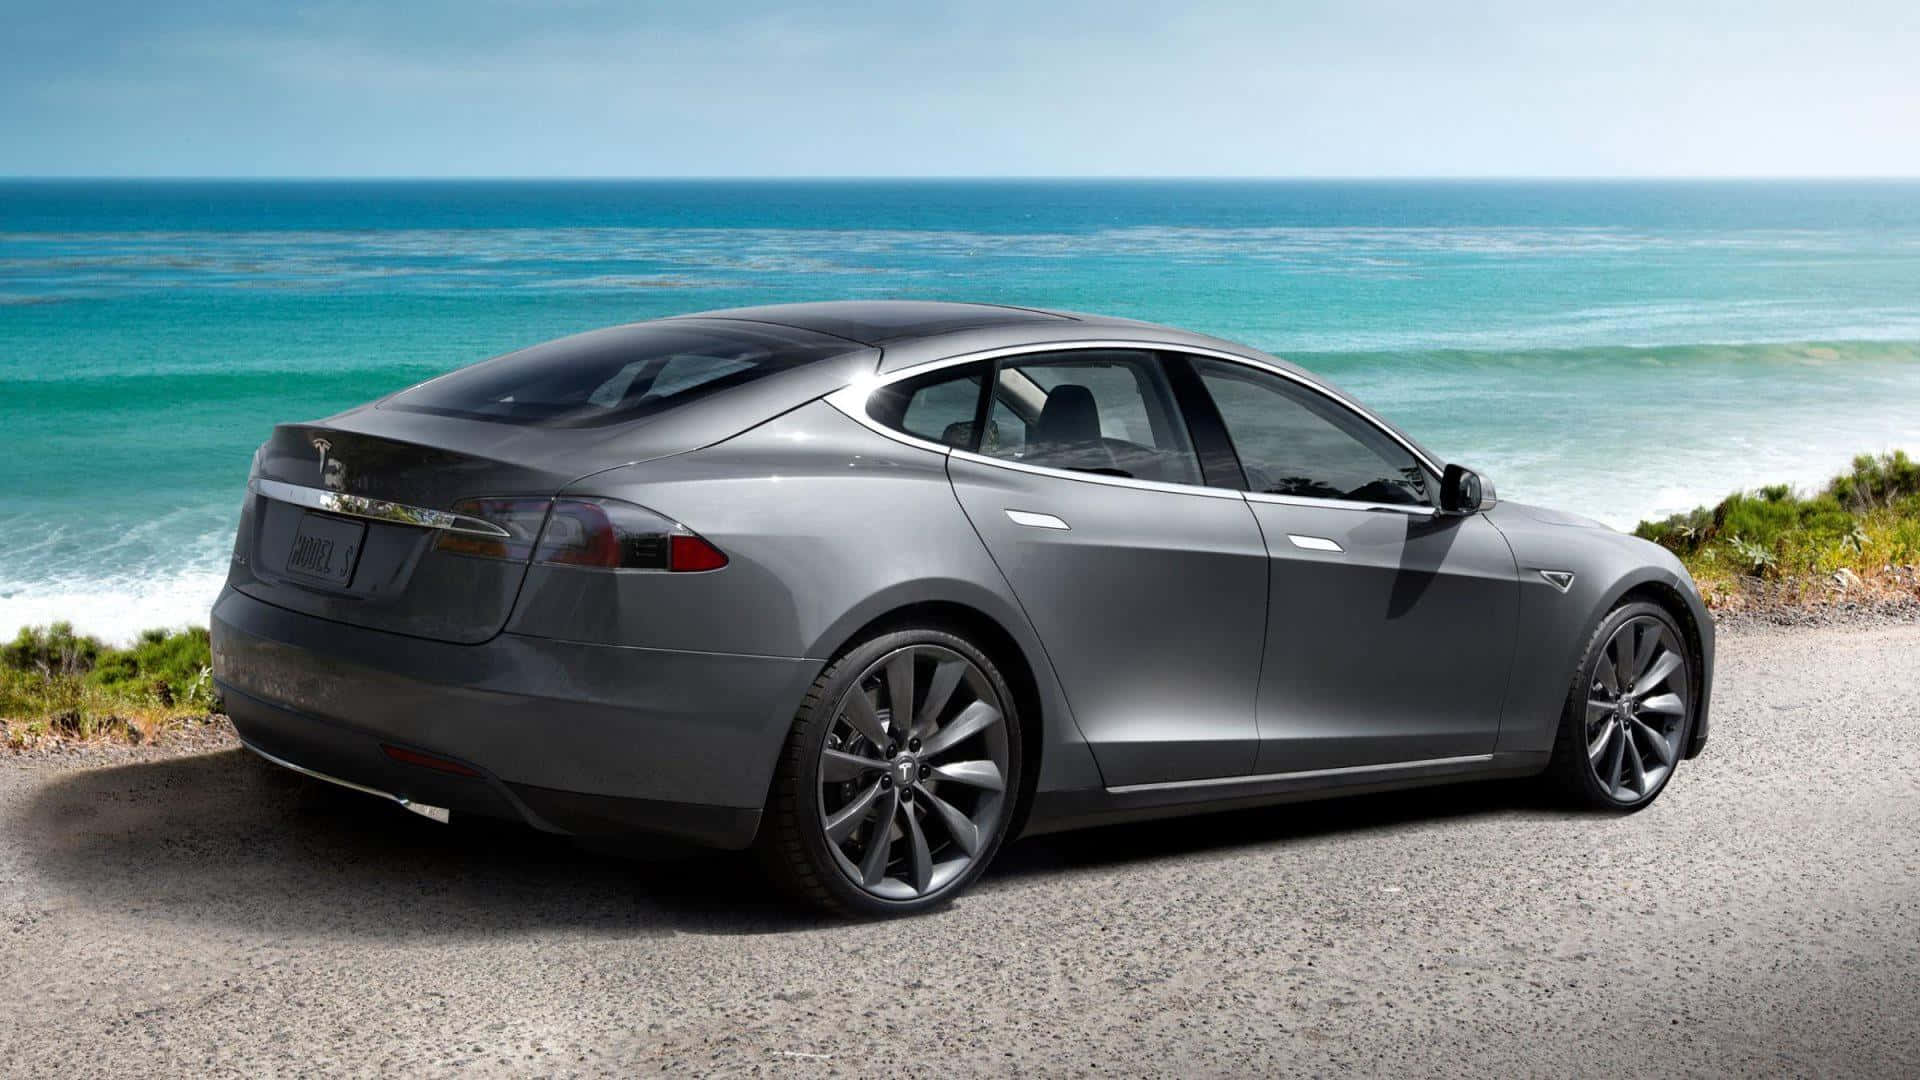 Get Behind the Wheel of the High-Tech Tesla Model 3